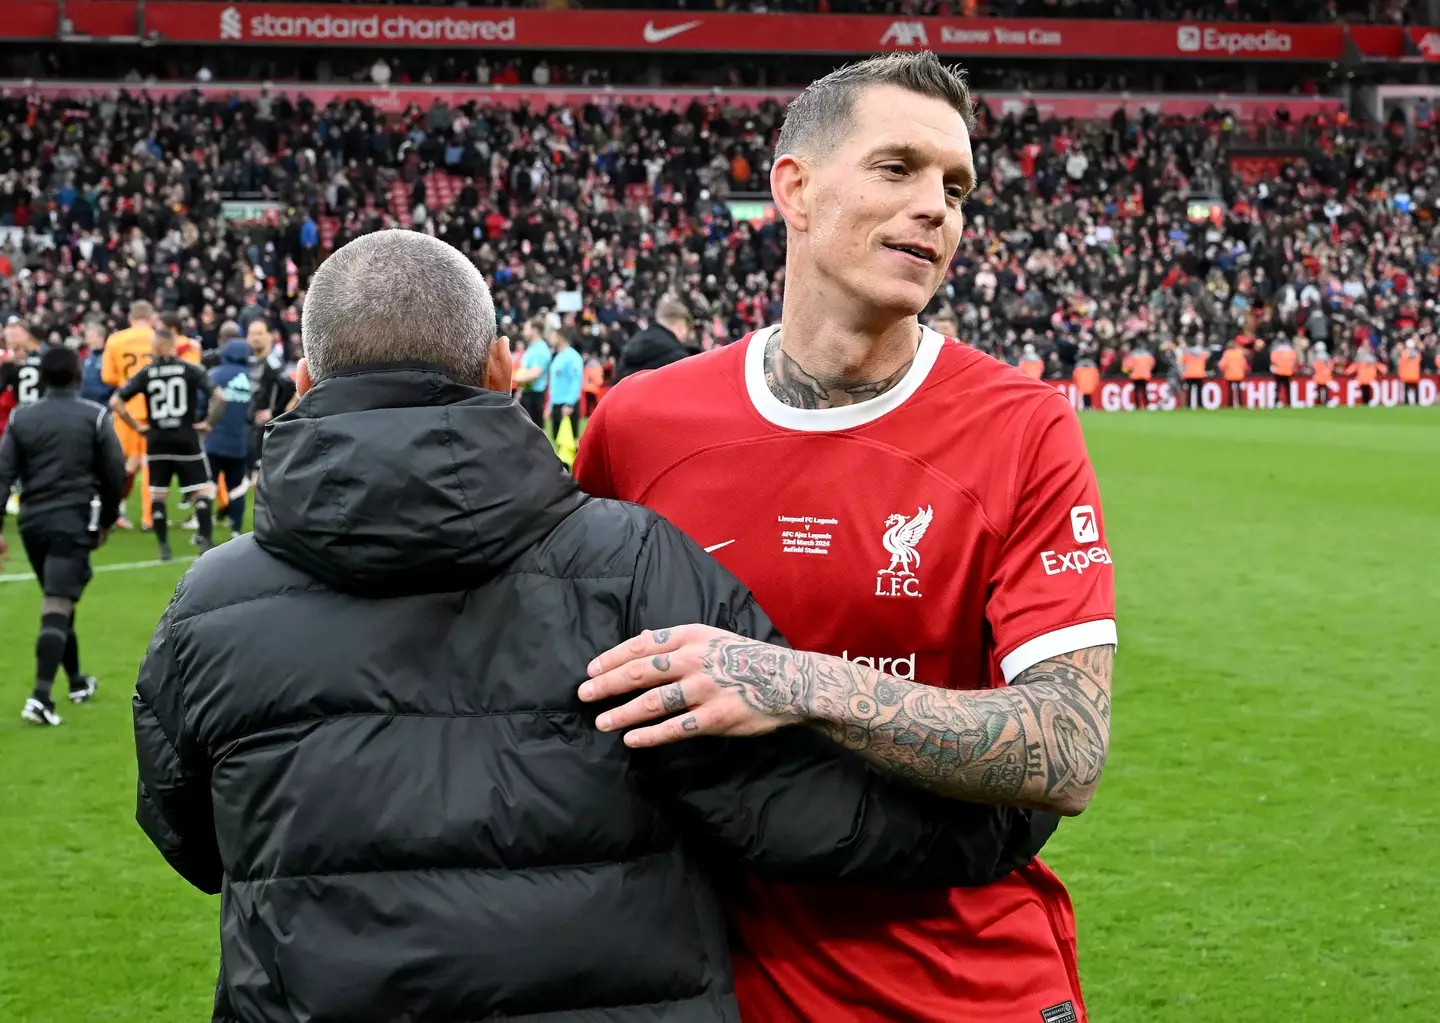 Agger has led a very different life since leaving Liverpool (Getty)